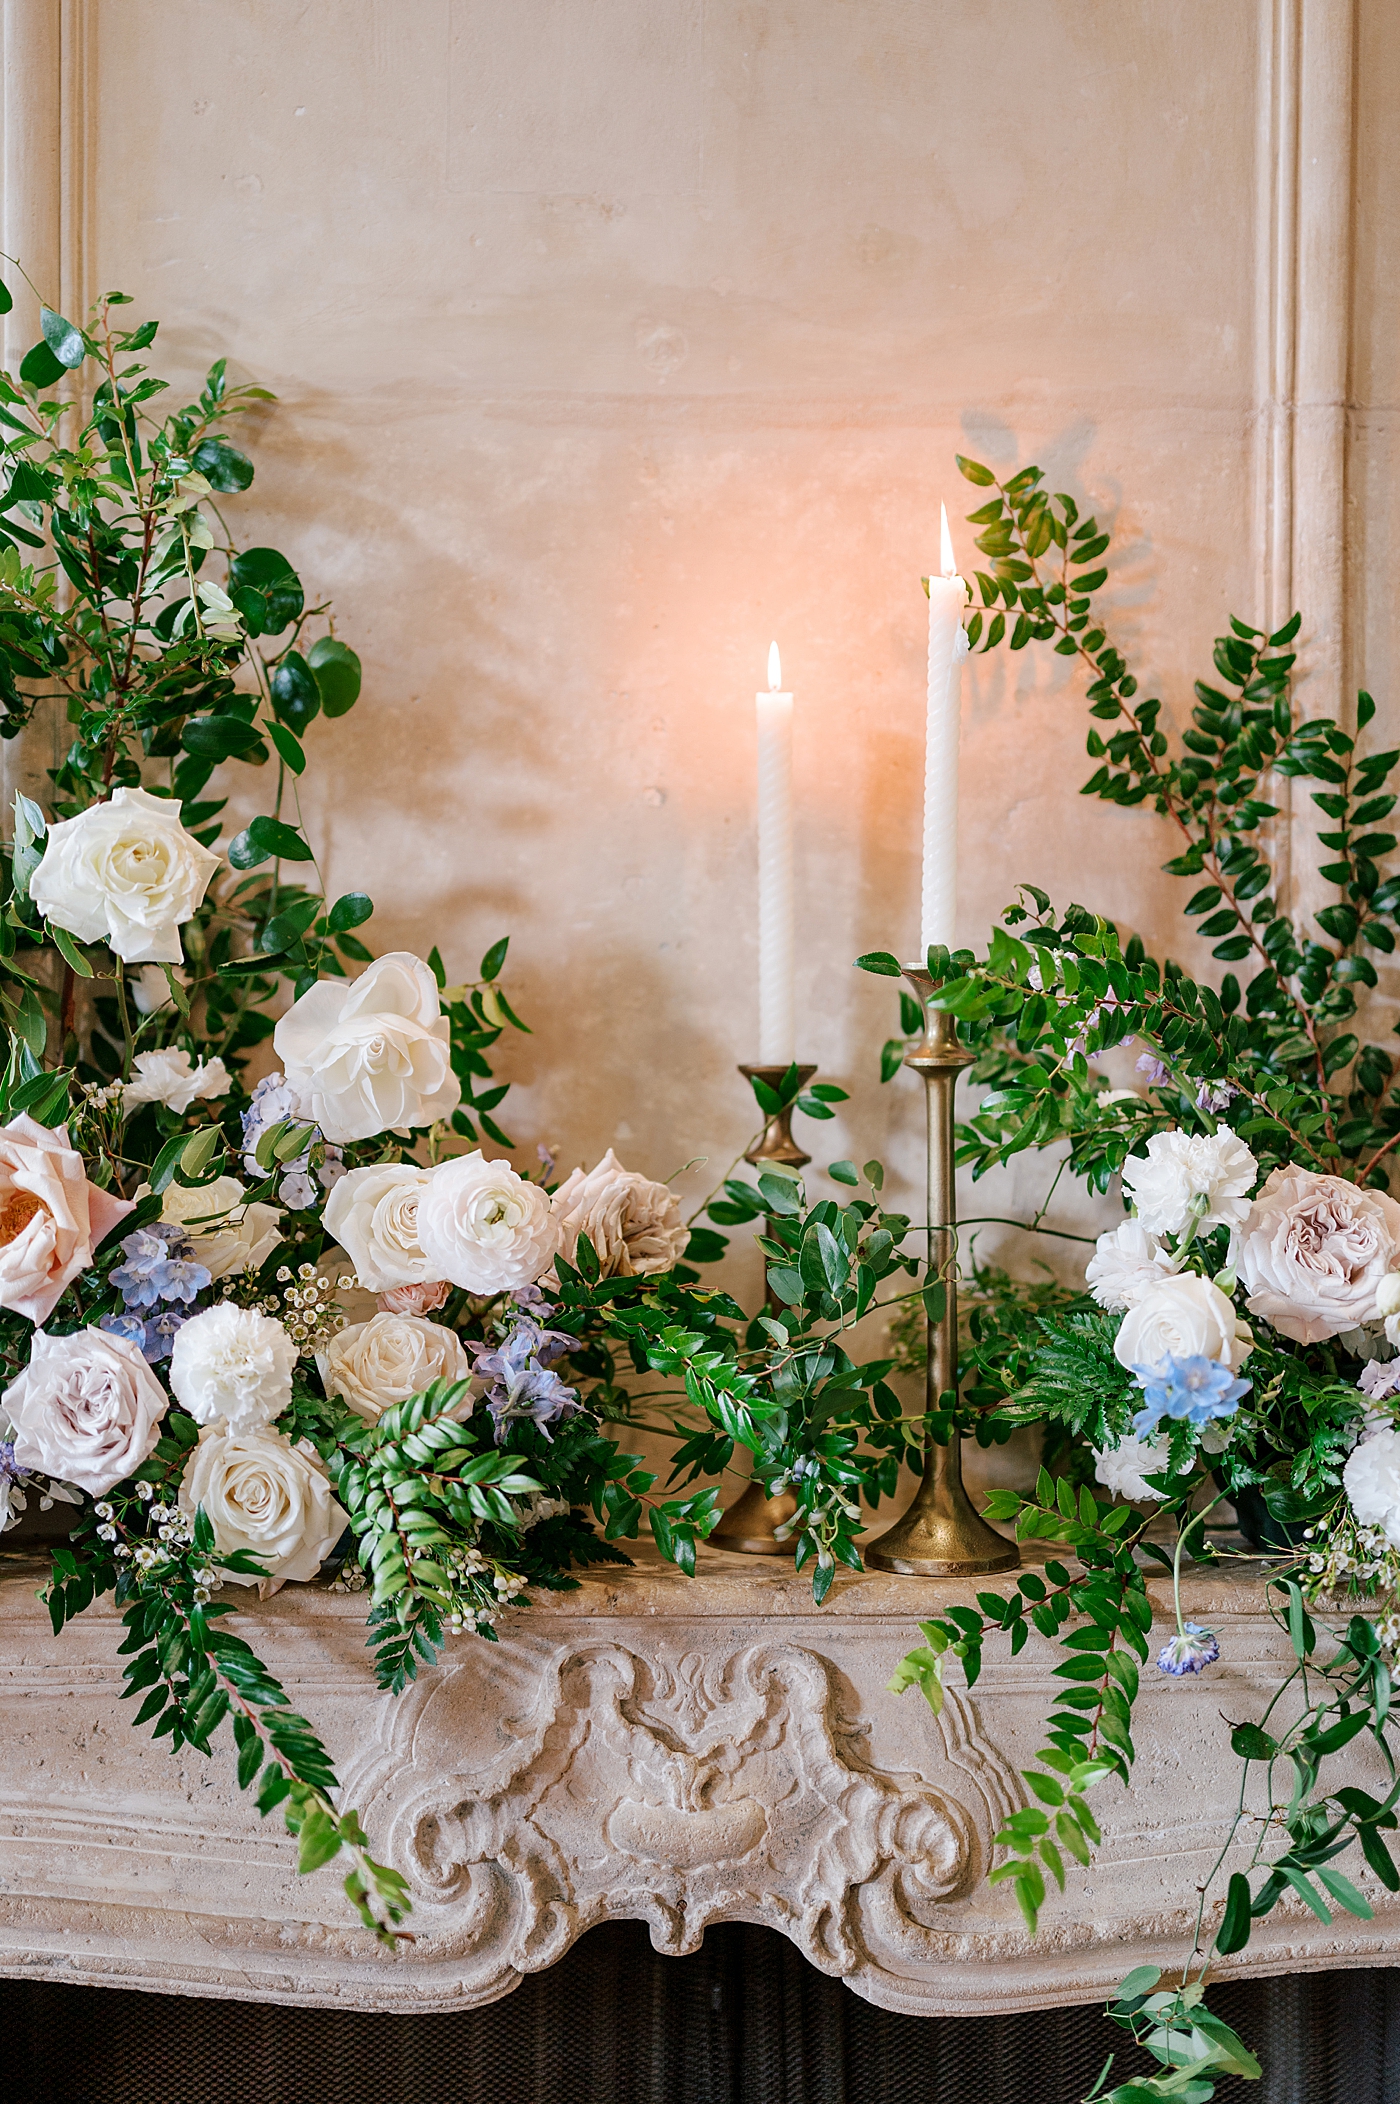 Mantle with fresh flowers and tapered candles | Image by Hope Helmuth Photography